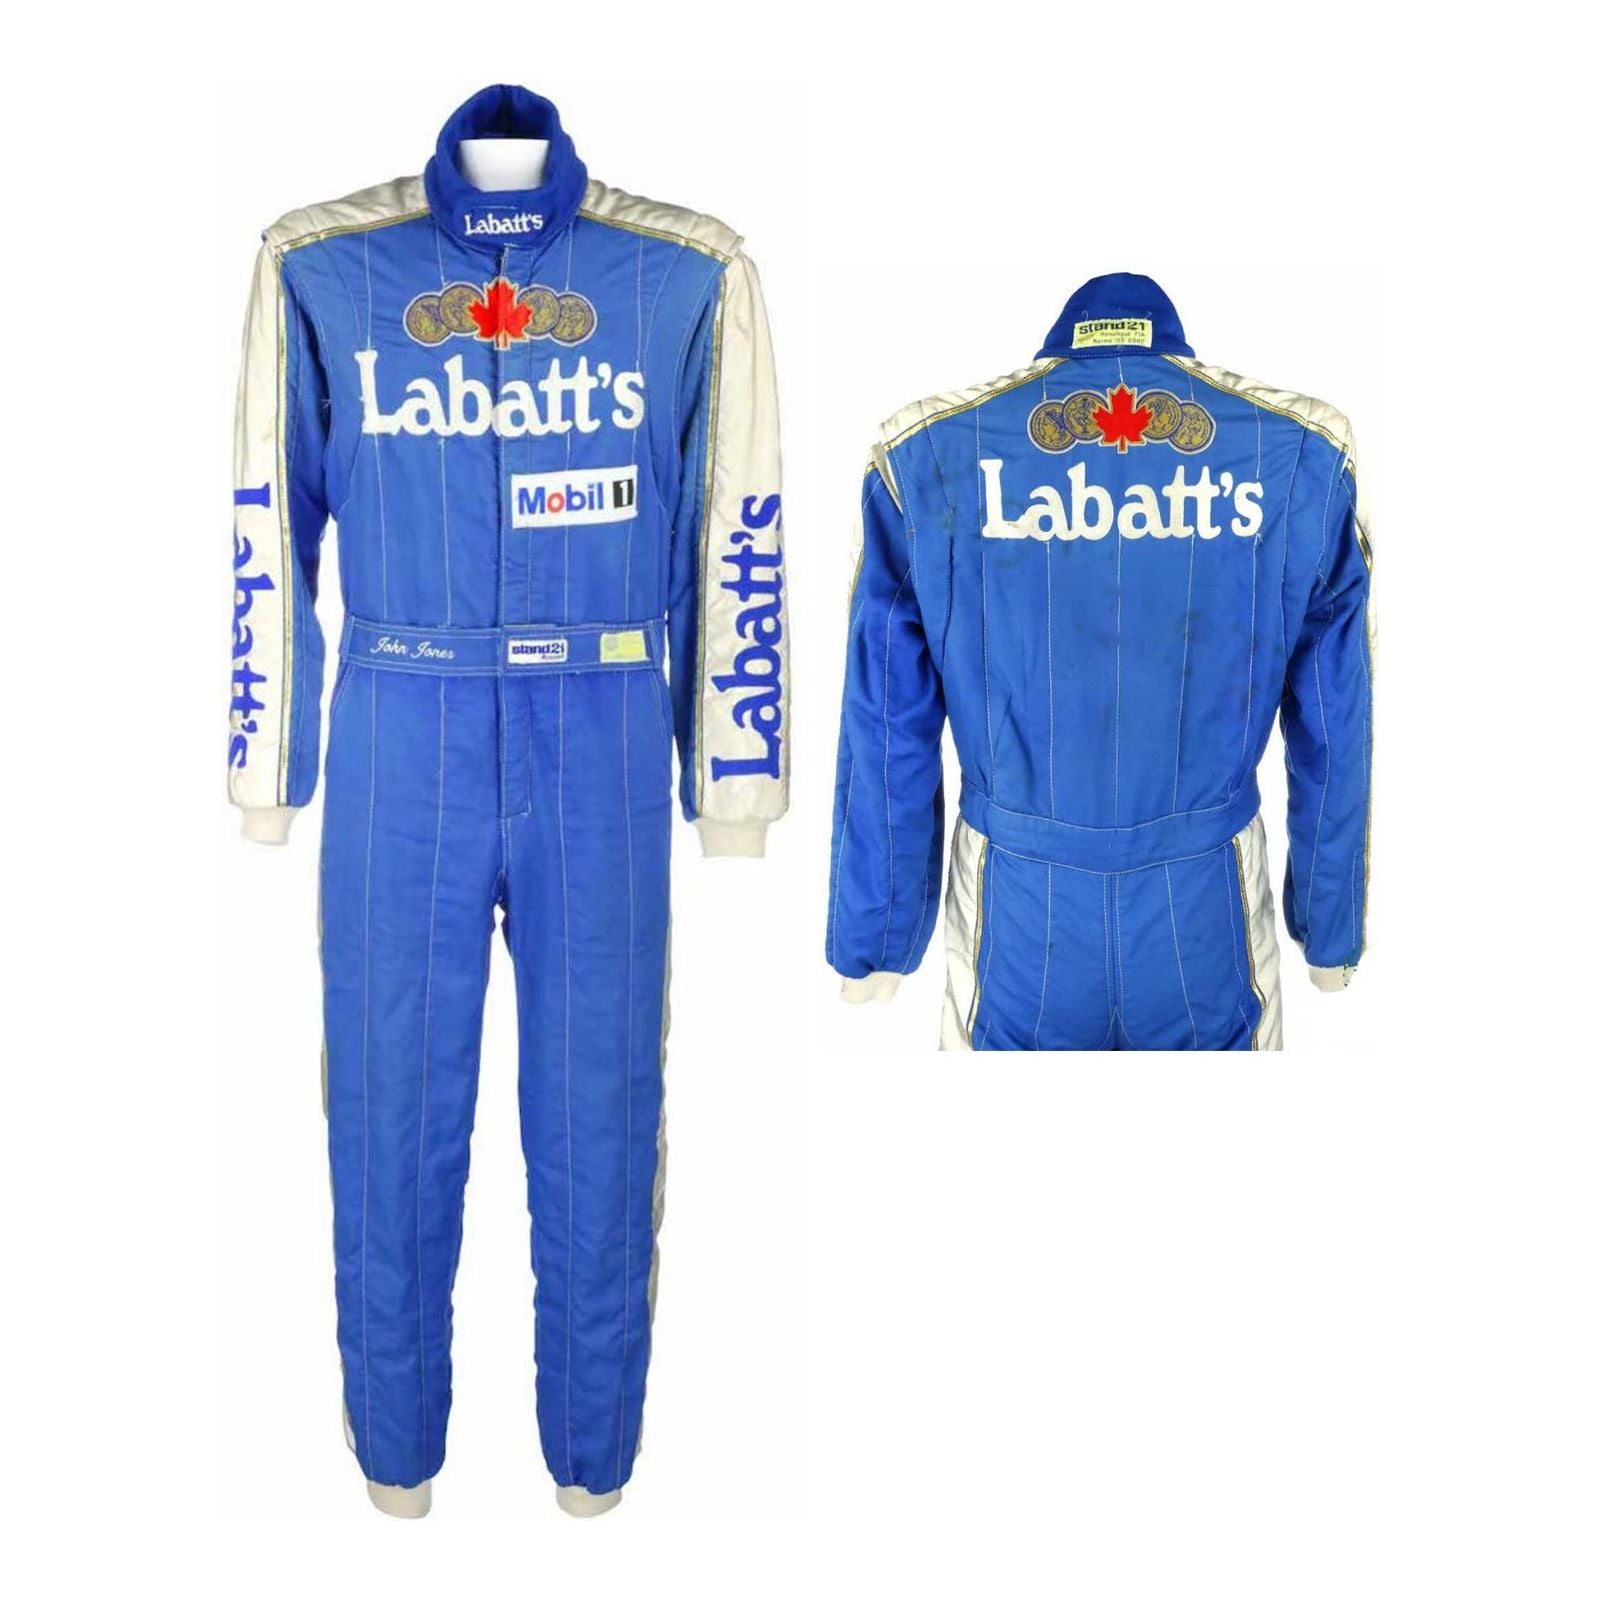 kart racing Sublimation Protective clothing Racing gear Suit N-0232